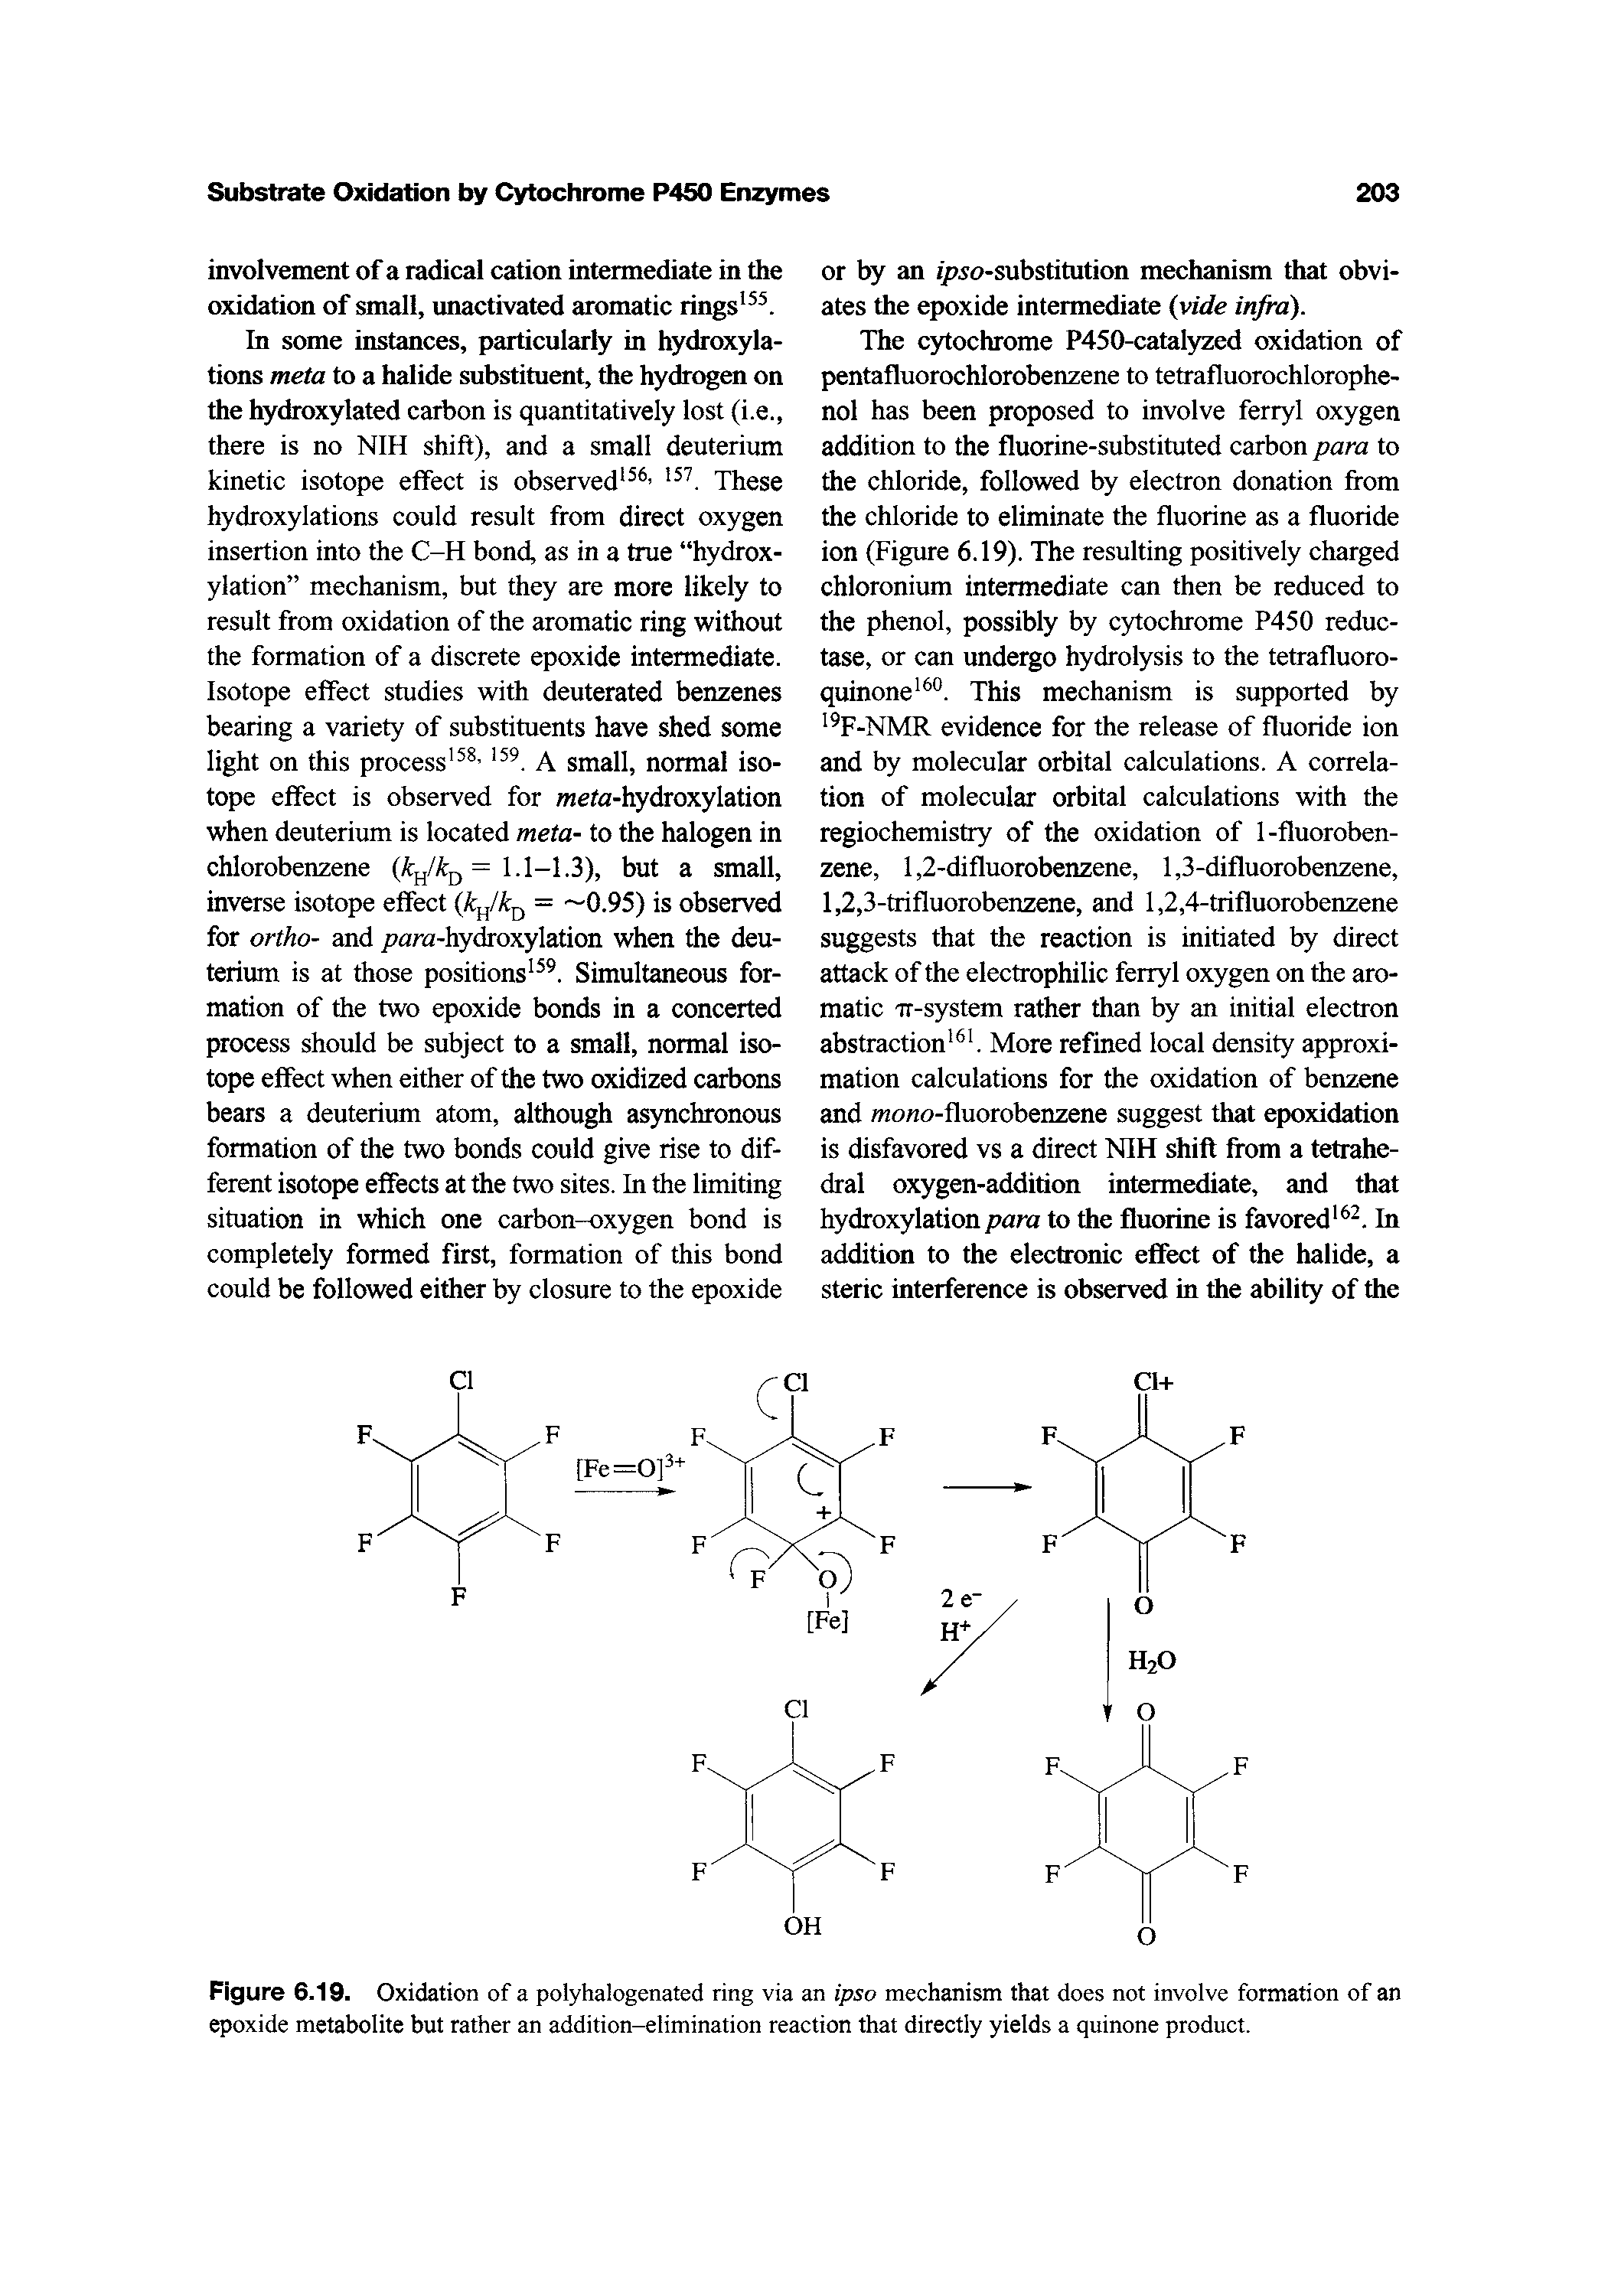 Figure 6.19. Oxidation of a polyhalogenated ring via an ipso mechanism that does not involve formation of an epoxide metabolite but rather an addition-elimination reaction that directly yields a quinone product.